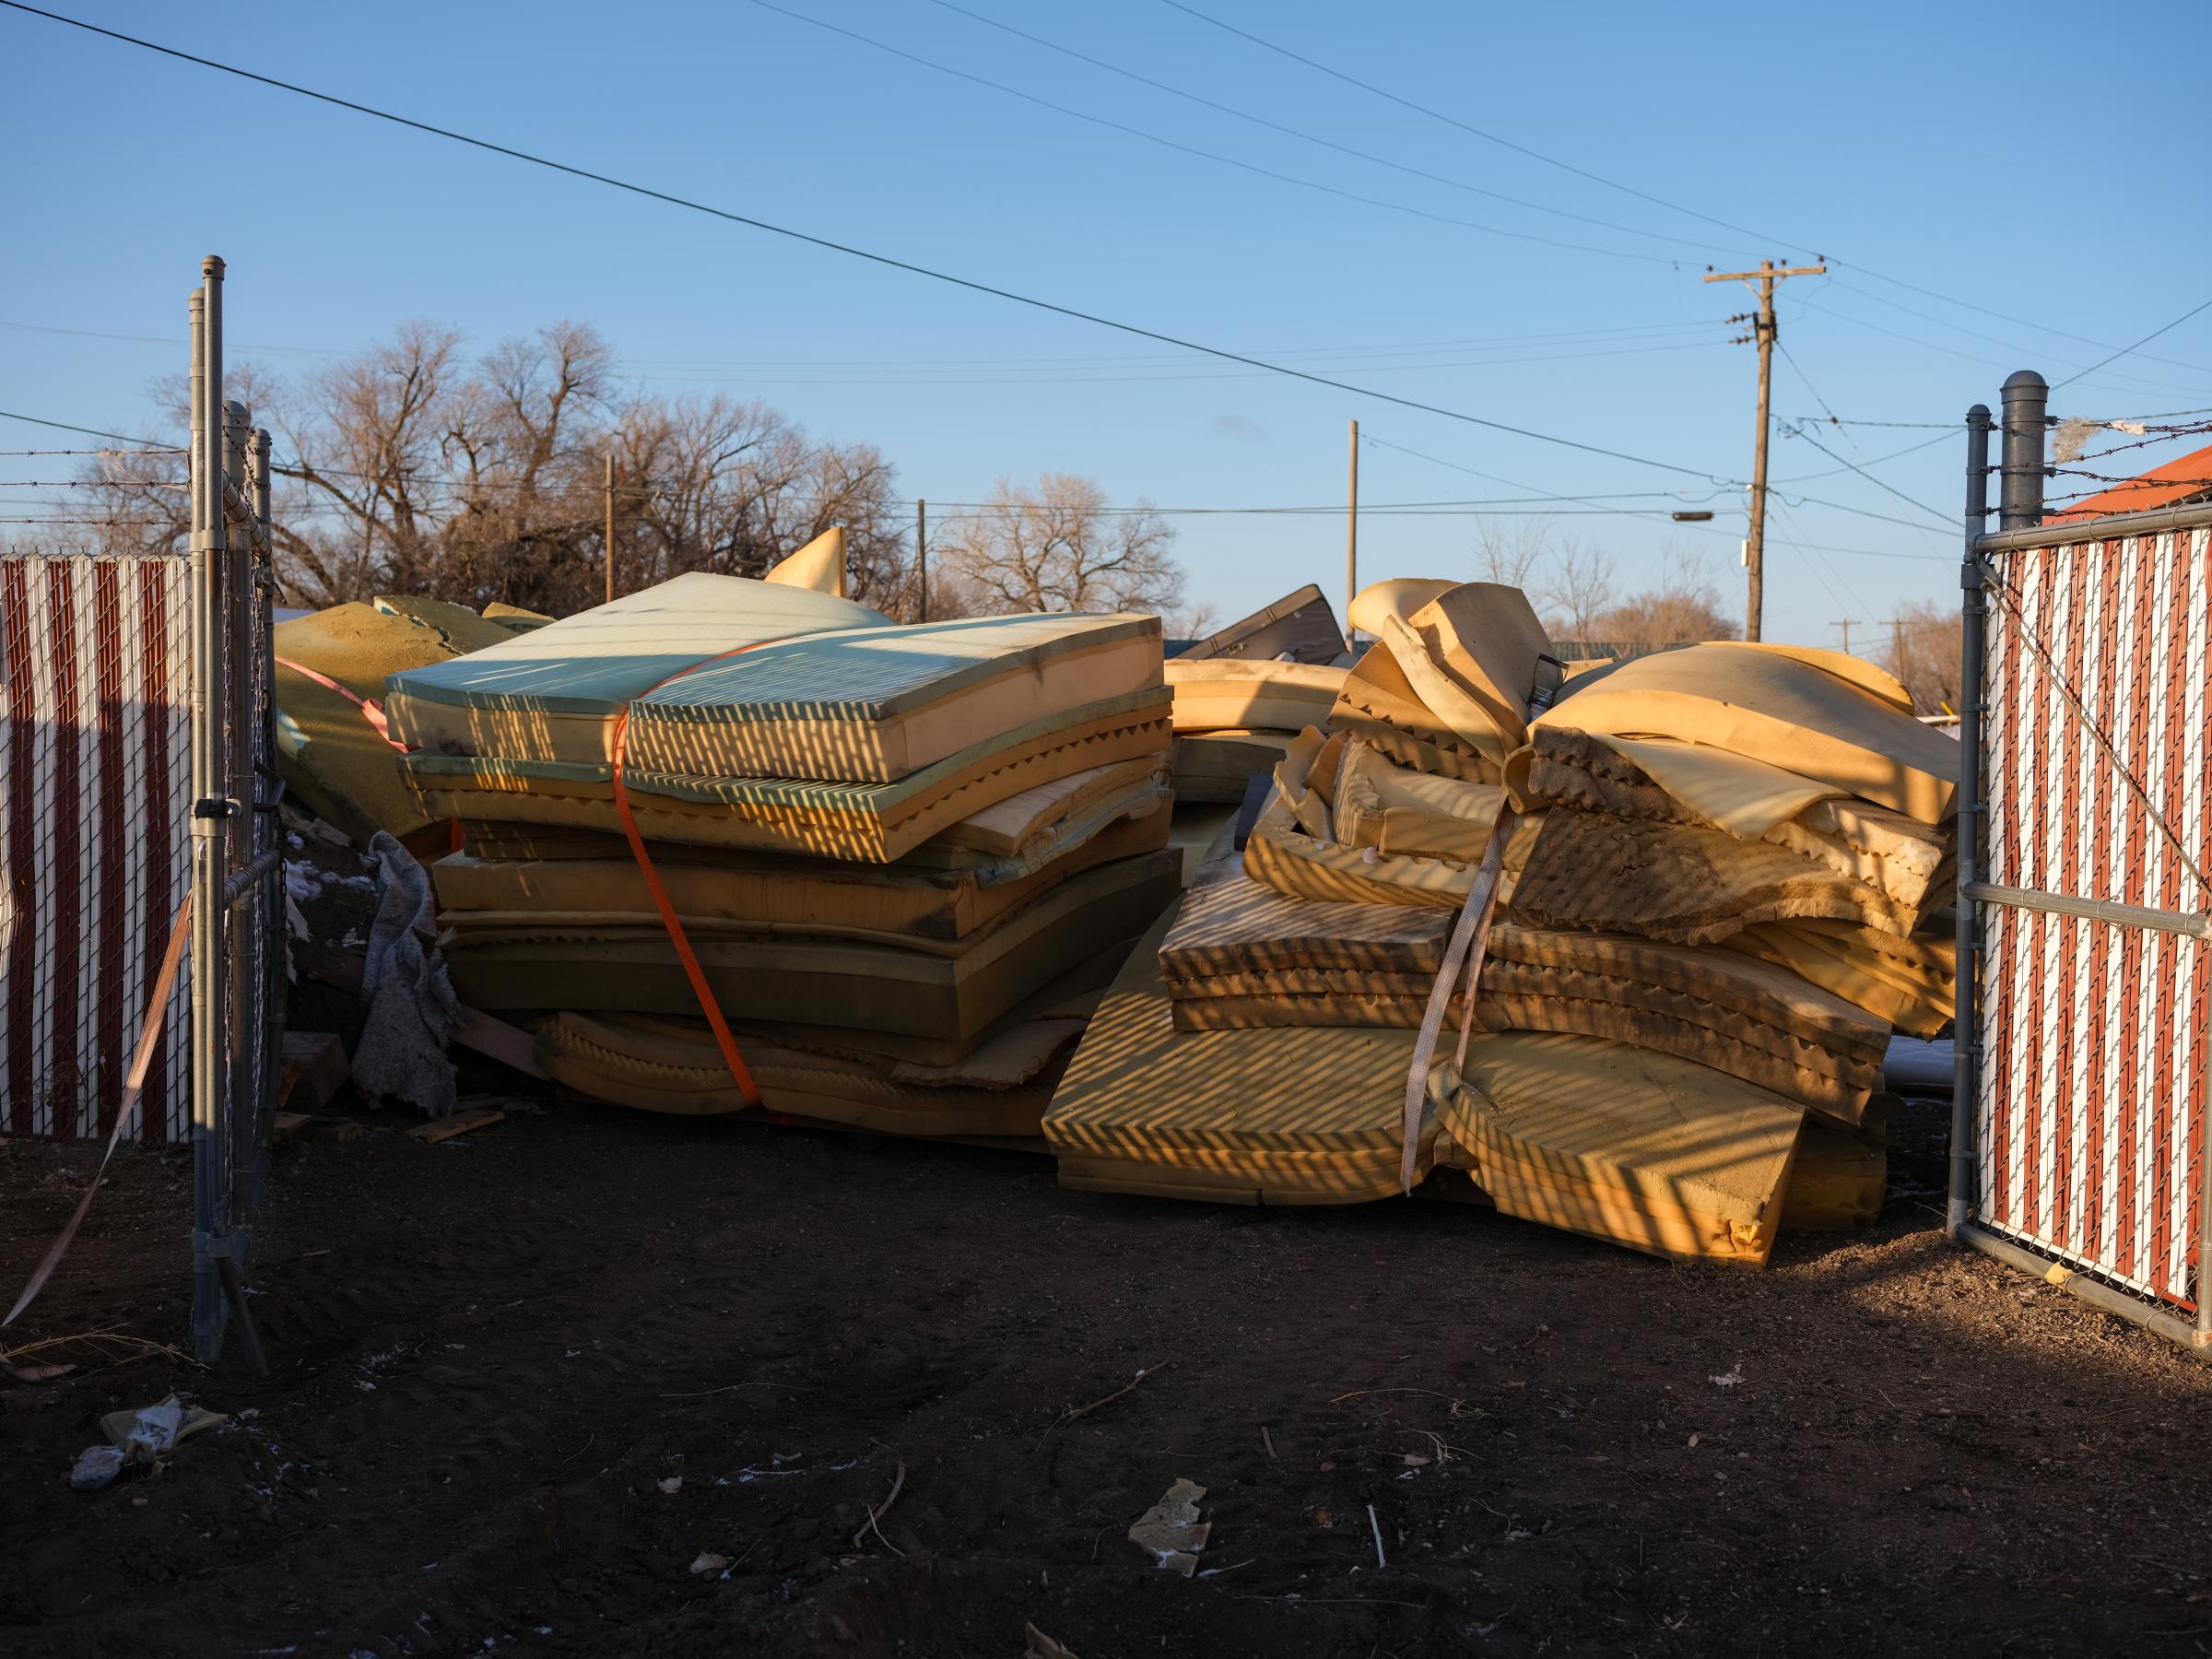 Piled up mattresses at Floyd Bledsoe&#39;s mattress recycling facility in Hutchinson, Kansas, USA on January 15, 2022. Assignment code 20220115InnocentMan Hutchinson USA